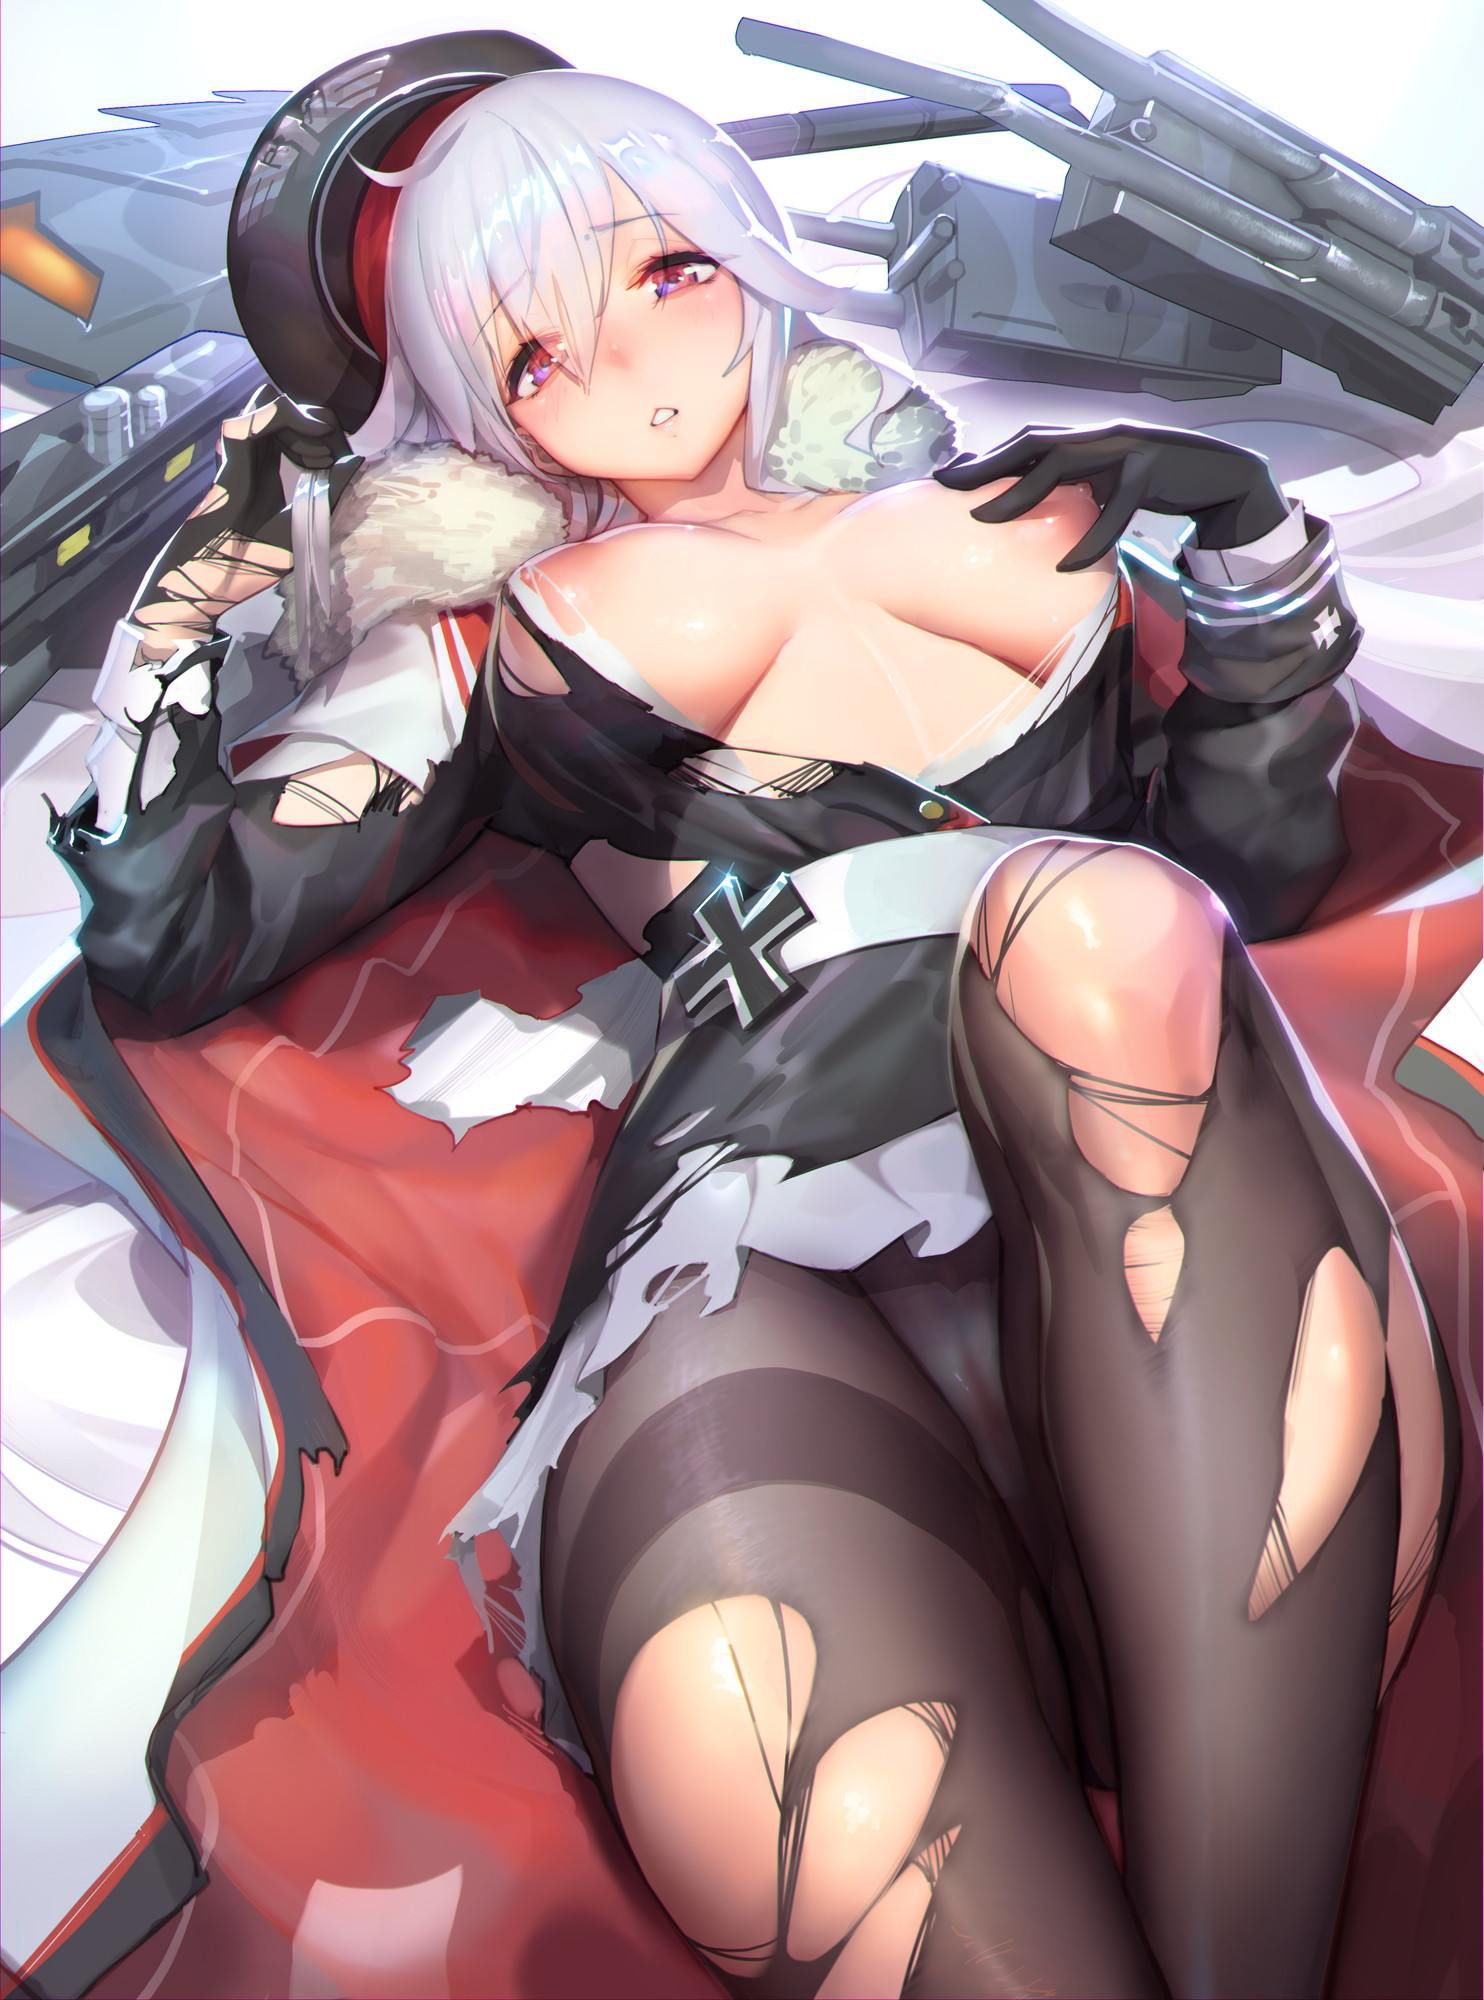 An erotic image that goes through Graf Zeppelin of Ahe face that is about to fall into pleasure! 【Azur Lane】 7